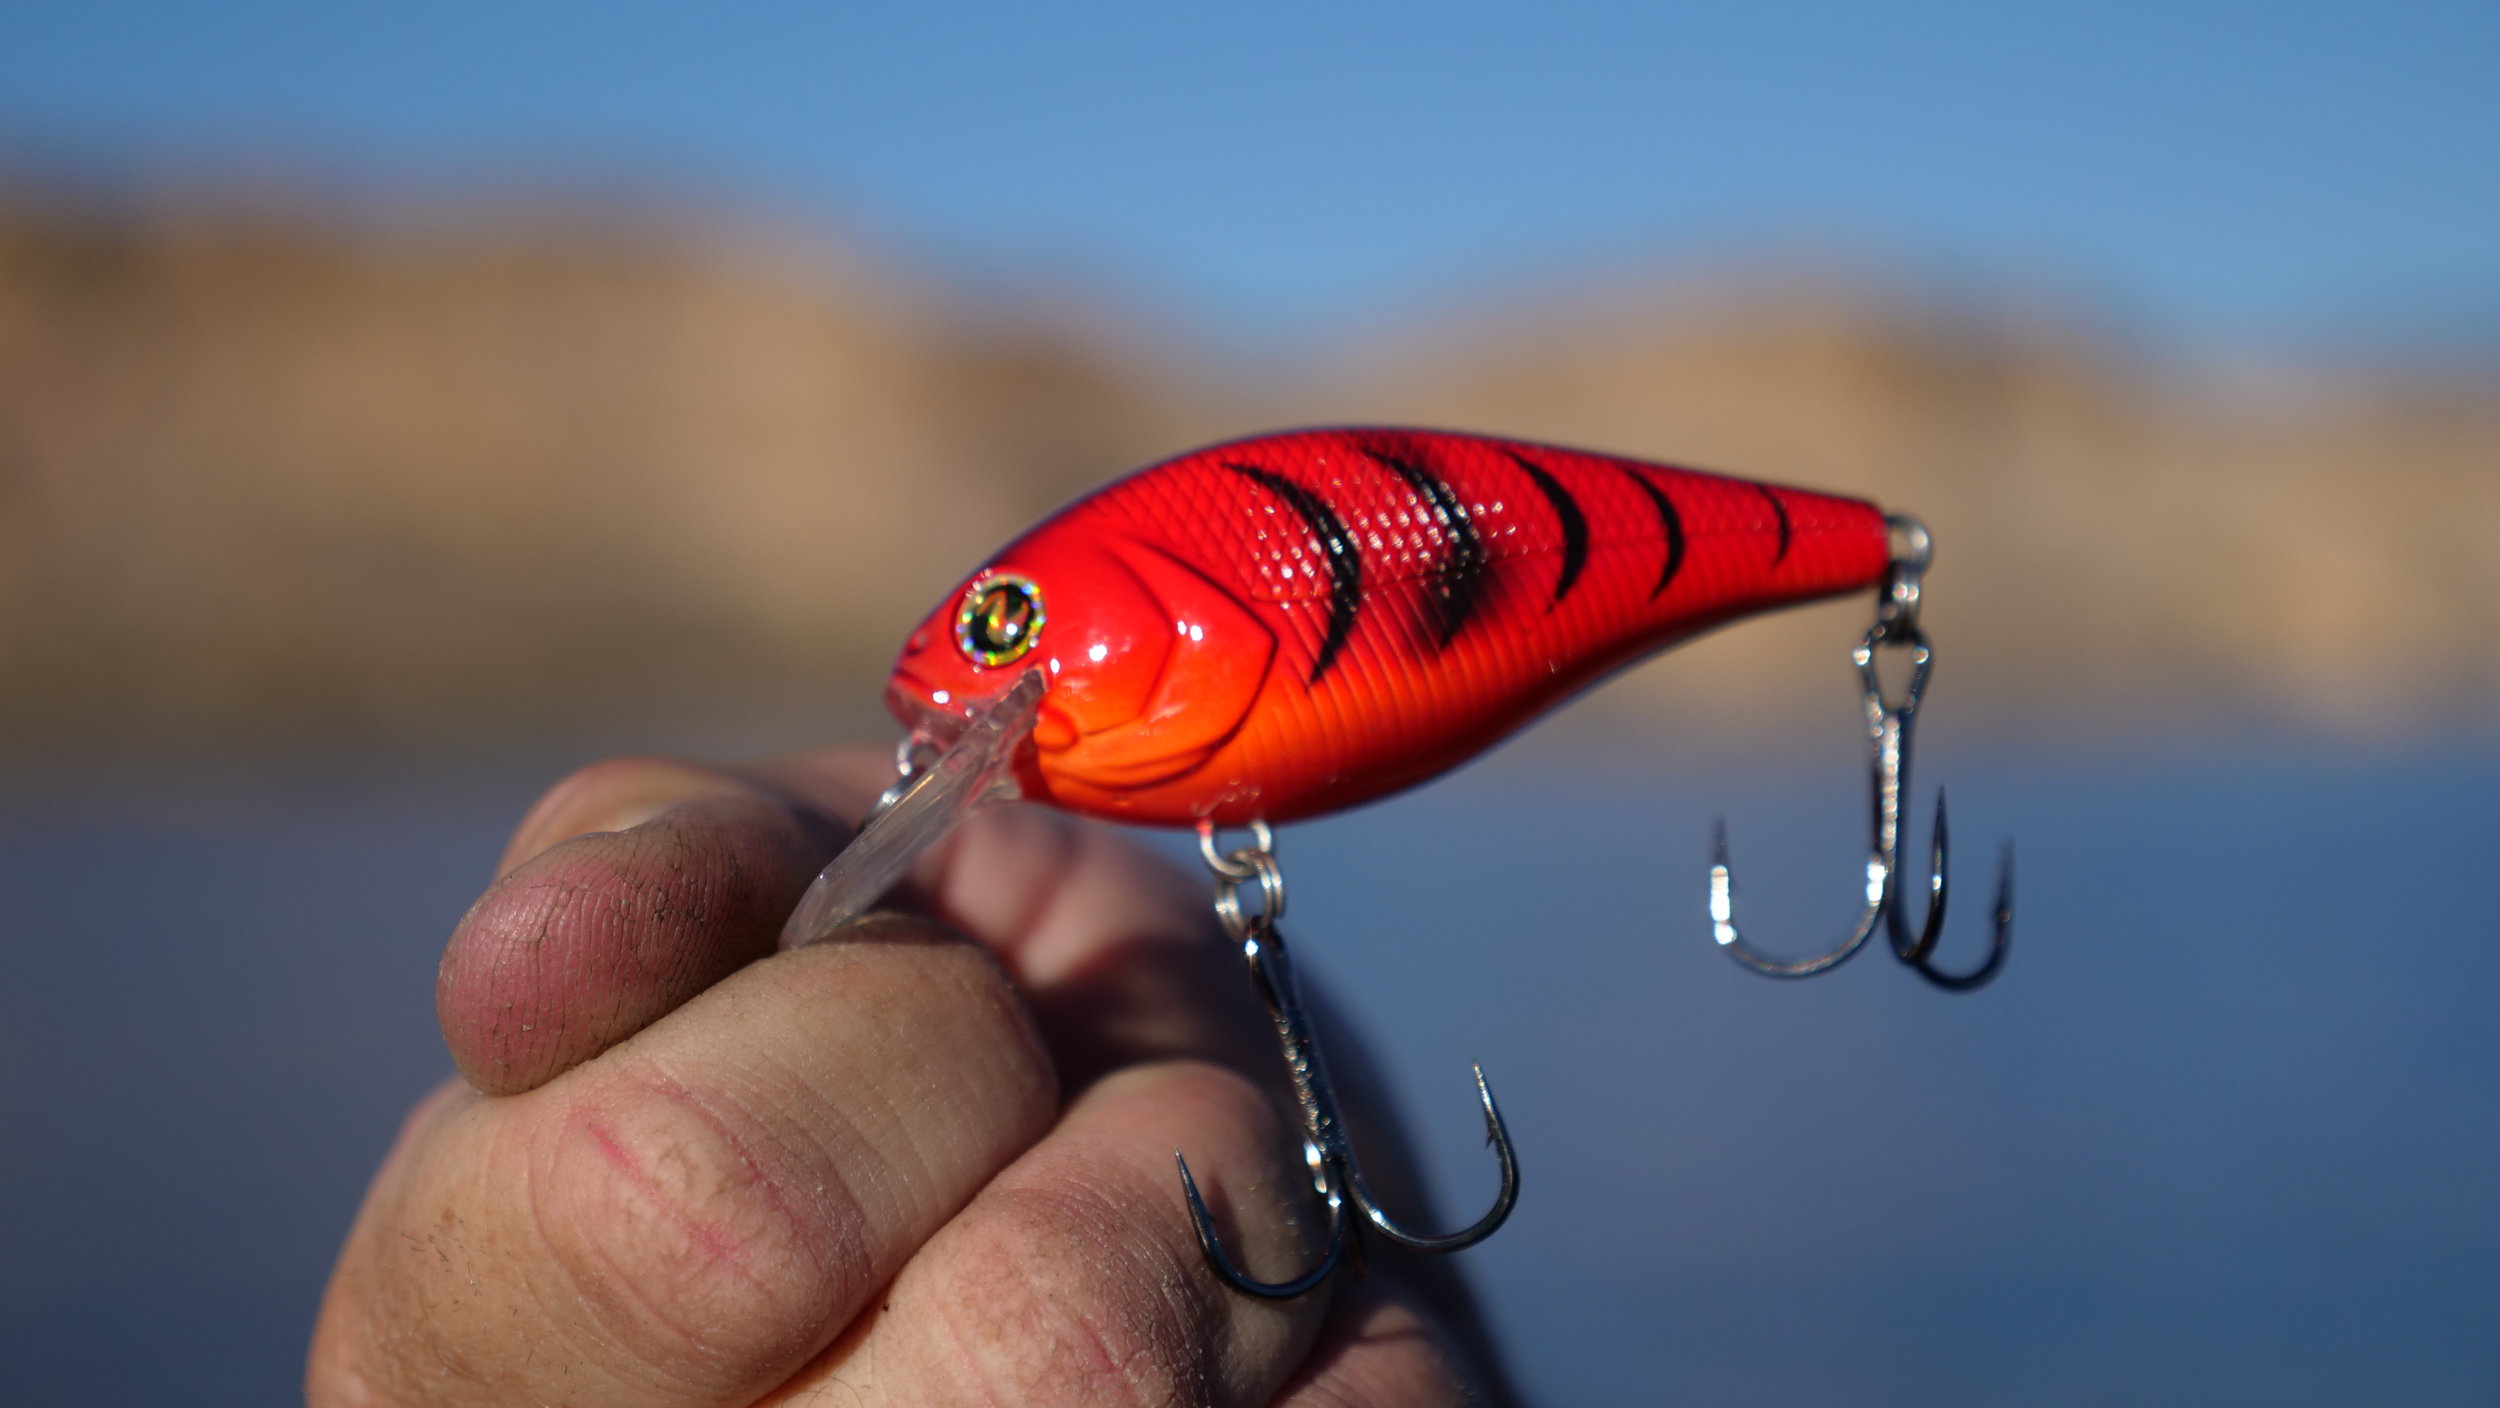 Itumo Pitty 65SP fishing lures range of colors 